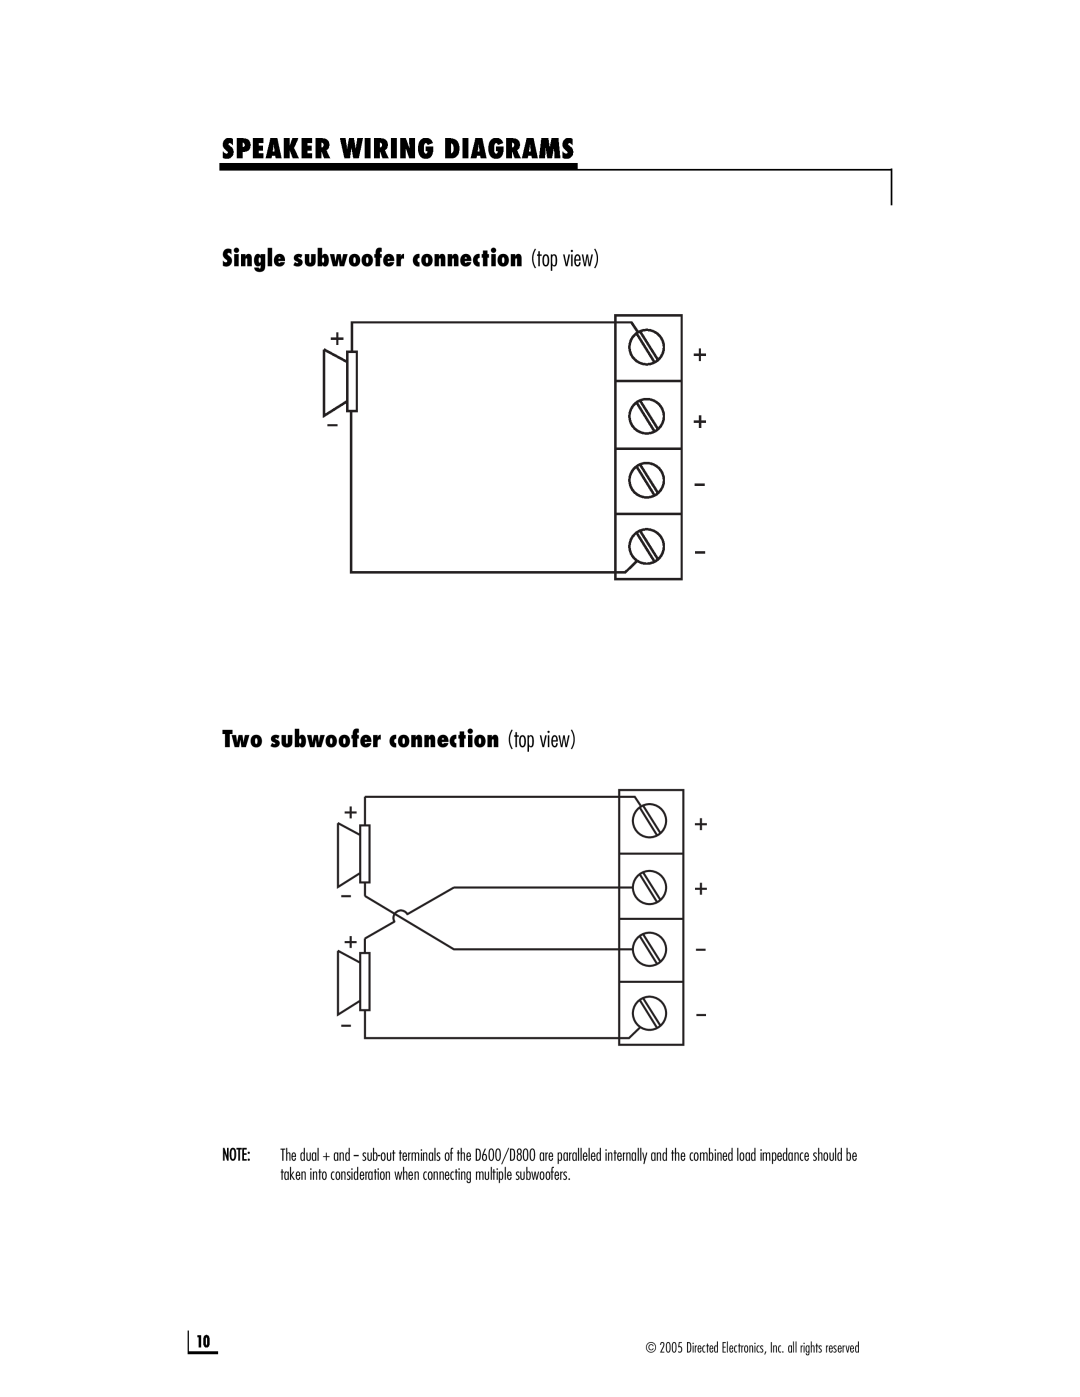 Directed Electronics D600 Speaker Wiring Diagrams, Single subwoofer connection top view, Two subwoofer connection top view 